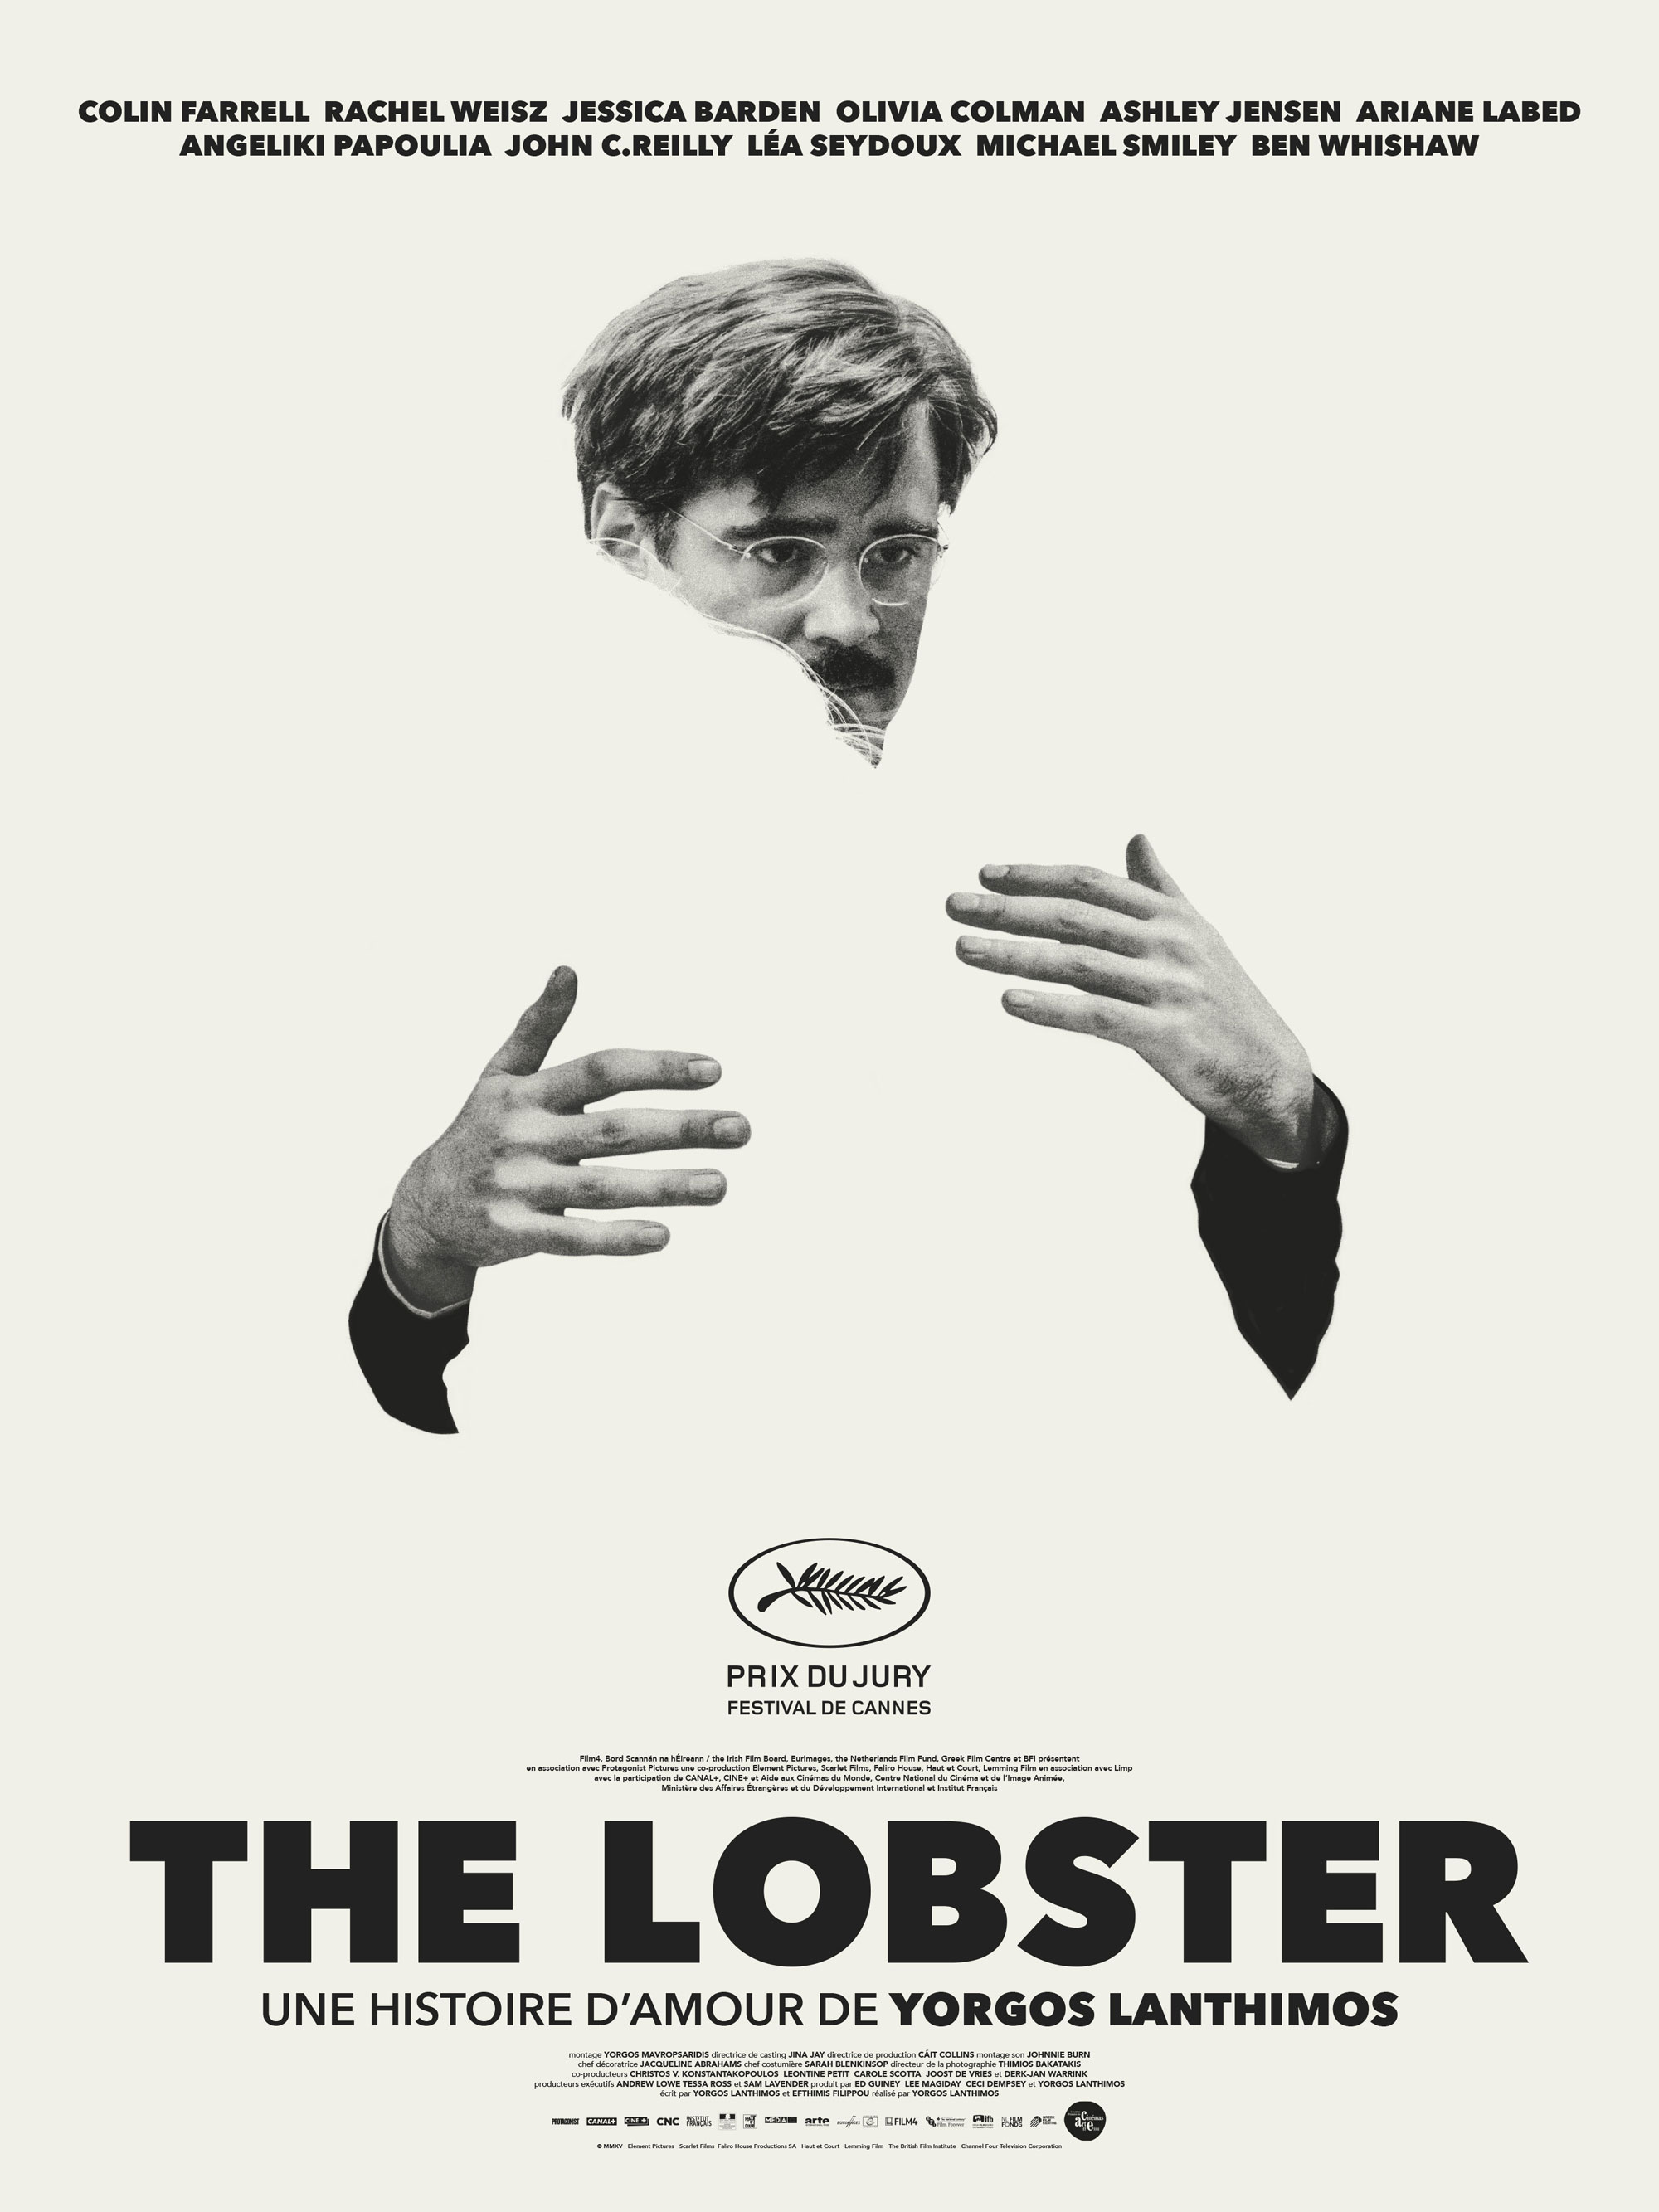 The Lobster - Affiche française Colin Farrell